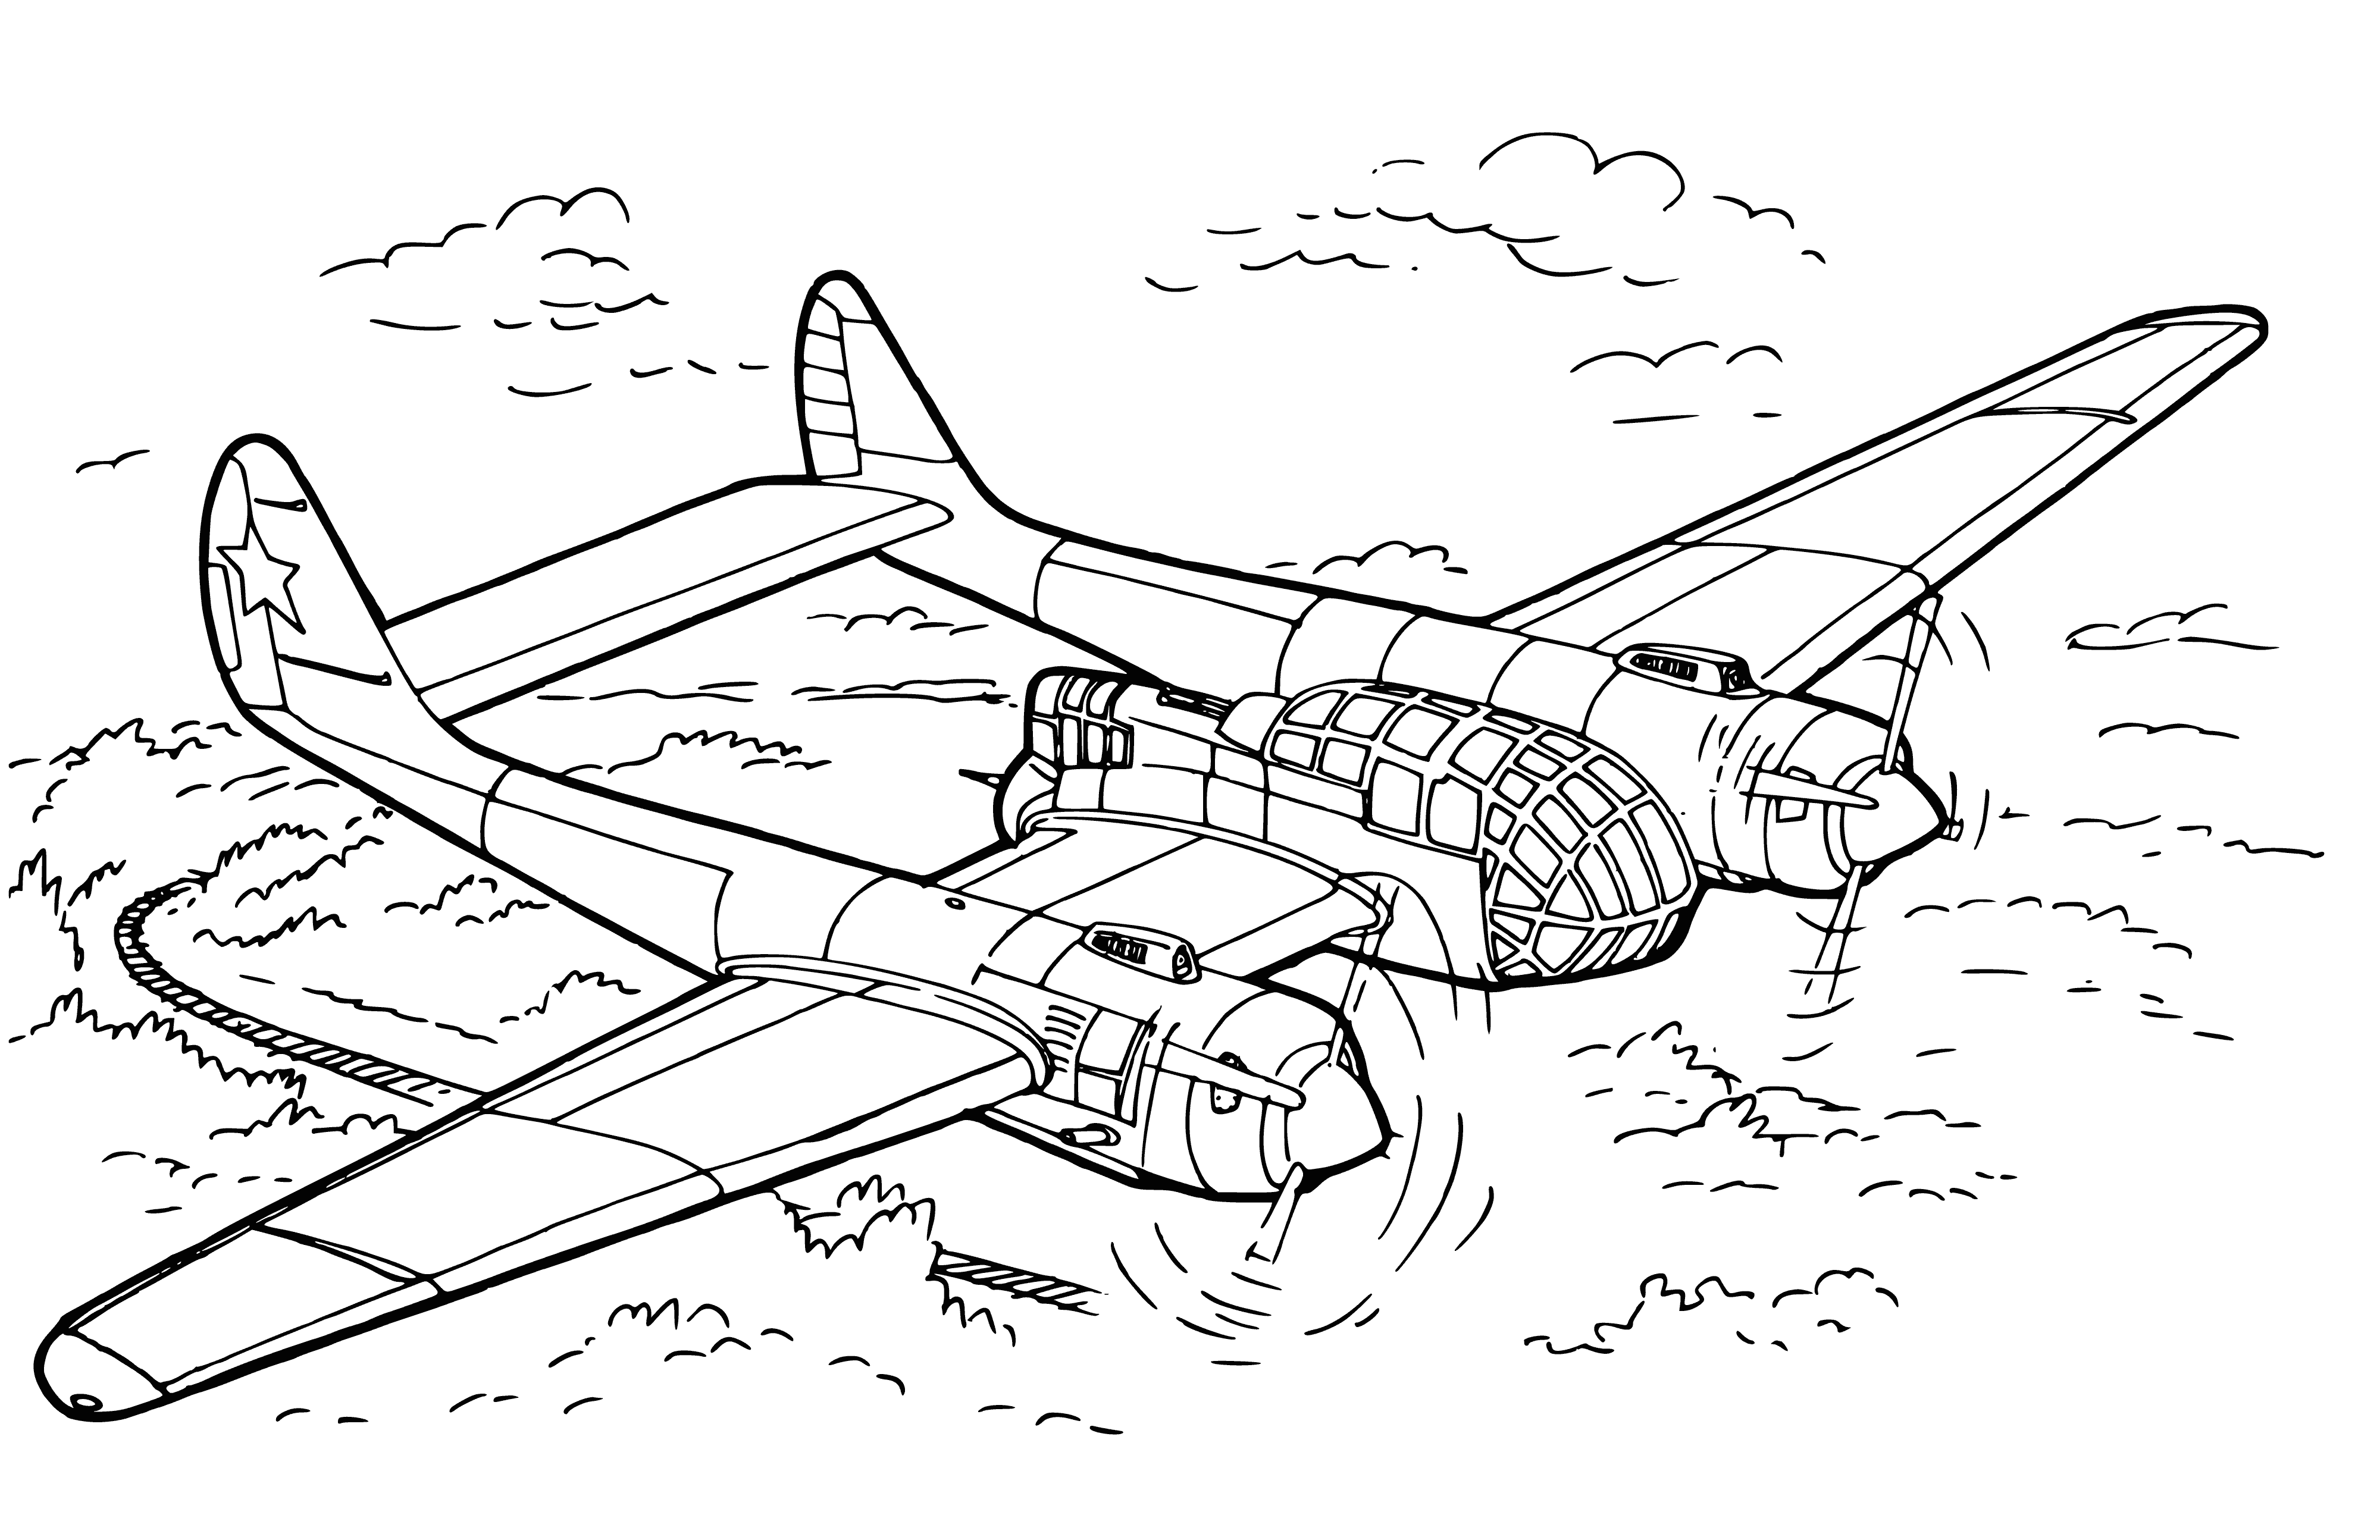 coloring page: Russian Su-12 twin-engine scout plane designed for military use w/ crew of 2, armed w/ 4 machine guns.